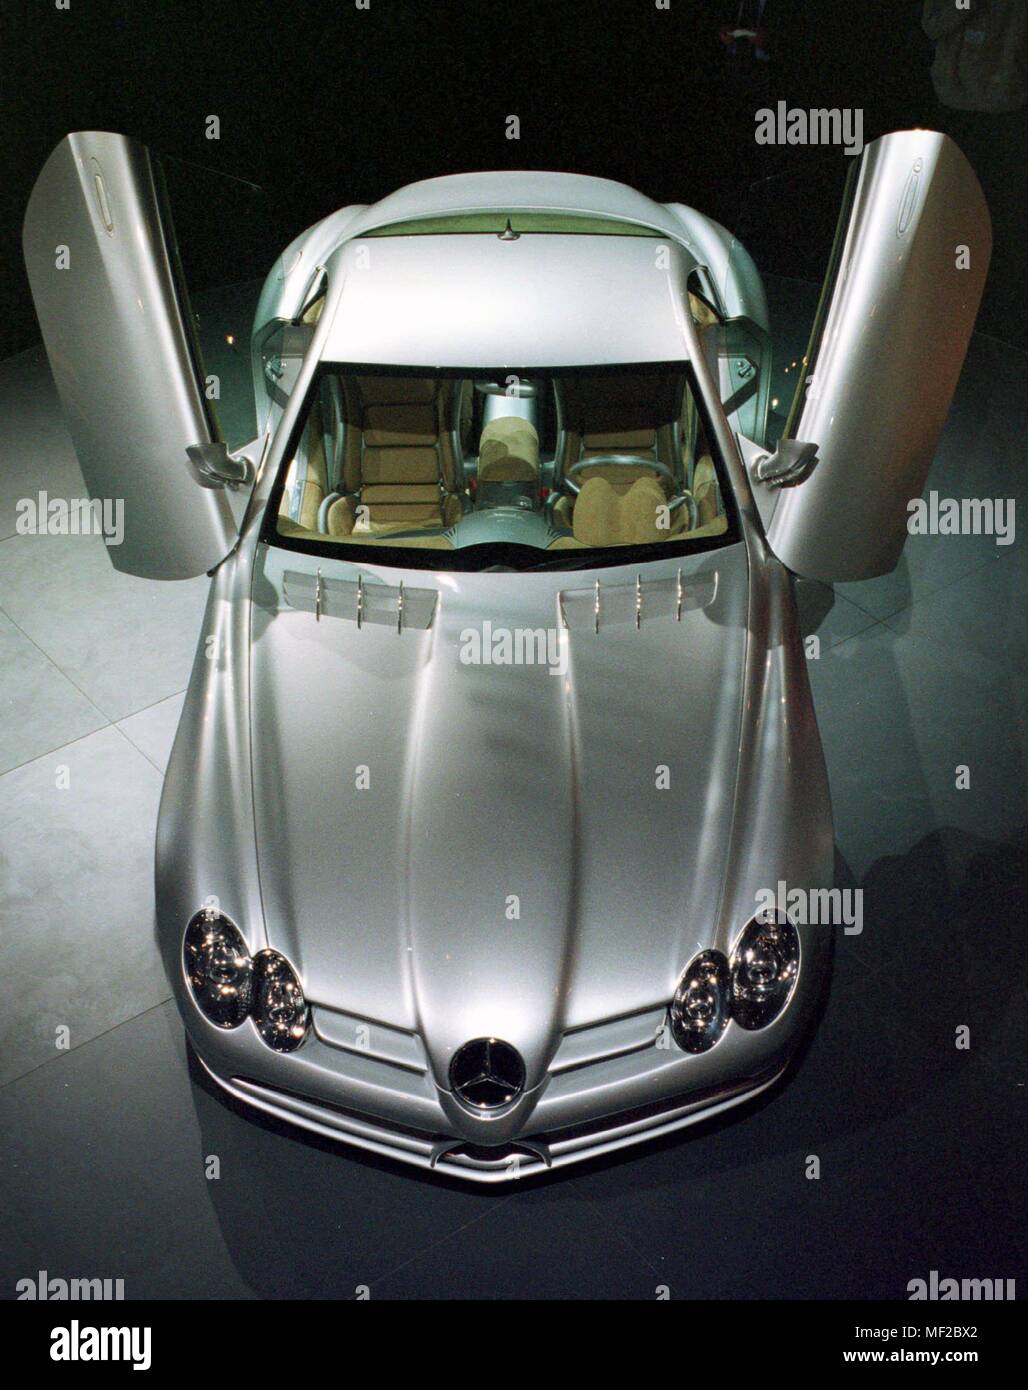 On 4.1.1999, the concept of the new Mercedes sports car SLR was built on the stand of the Stuttgart-based car manufacturer Mercedes-Benz at the Auto Show in Detroit (USA). According to Daimler Chrysler in Stuttgart, the Vision SLR sports car is designed to combine the visual elements of a Formula 1 Silver Arrow with legendary SLR sports cars from the 1950s. Among the hallmarks of the car include after swinging open top and a new, so-called adaptive headlight system. According to Daimler Chrysler, the Vision SLR is powered by a reworked 5.5-liter V8 engine and a supercharger. The power should b Stock Photo